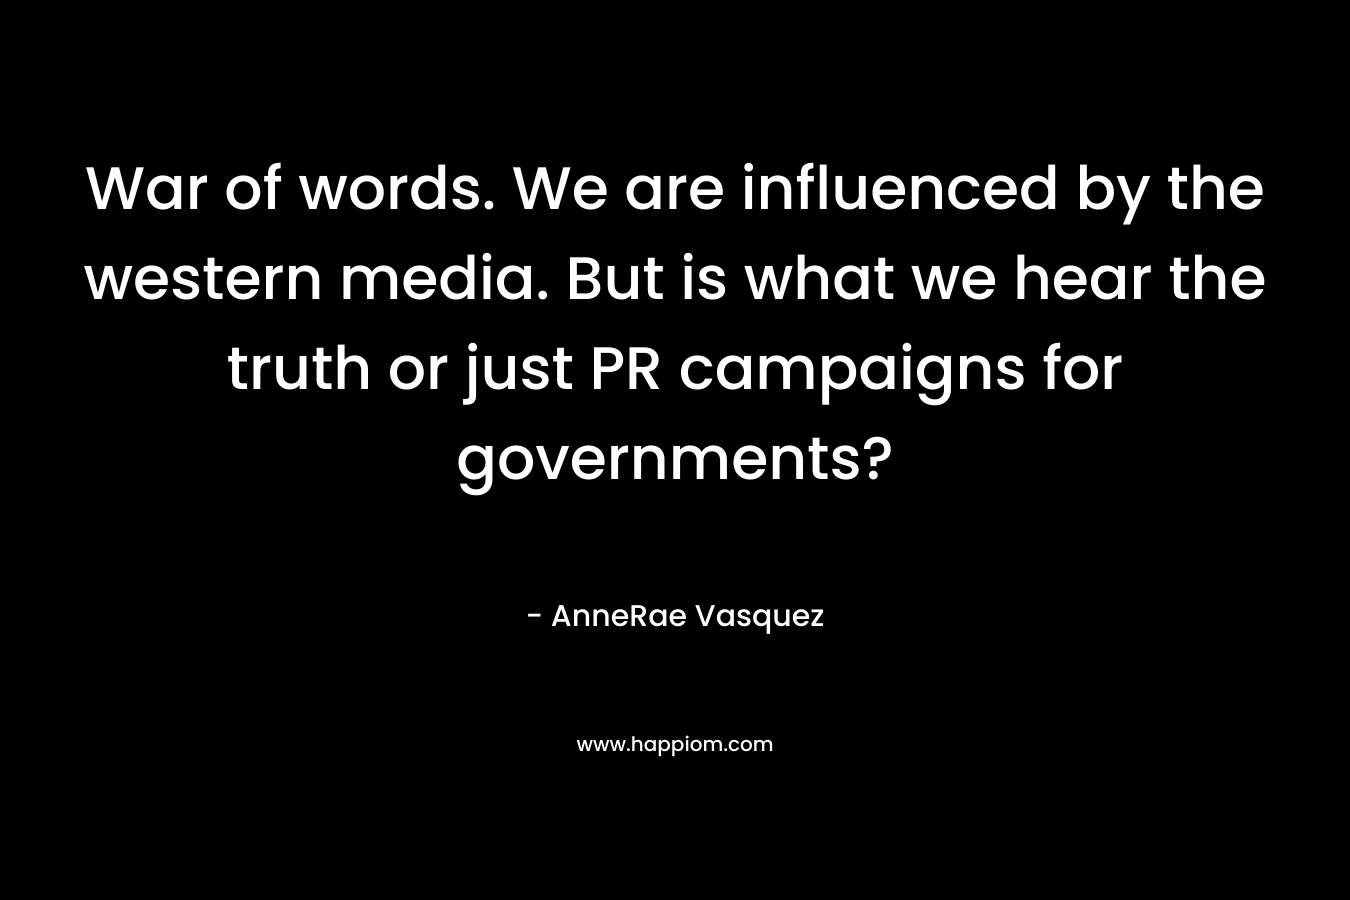 War of words. We are influenced by the western media. But is what we hear the truth or just PR campaigns for governments? – AnneRae Vasquez